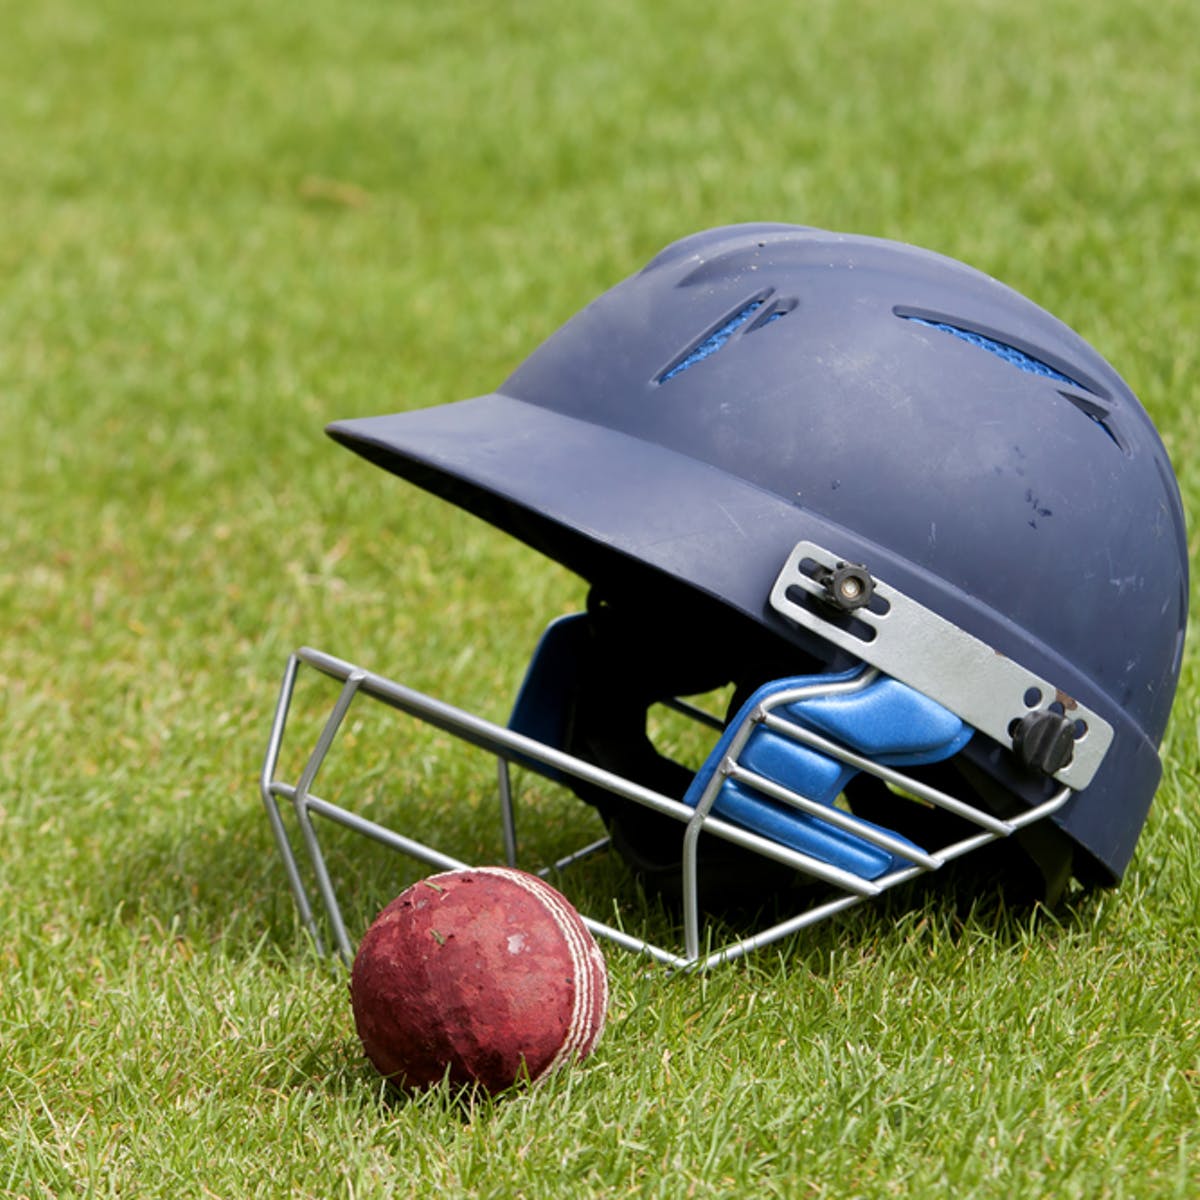 How to choose a cricket helmet?